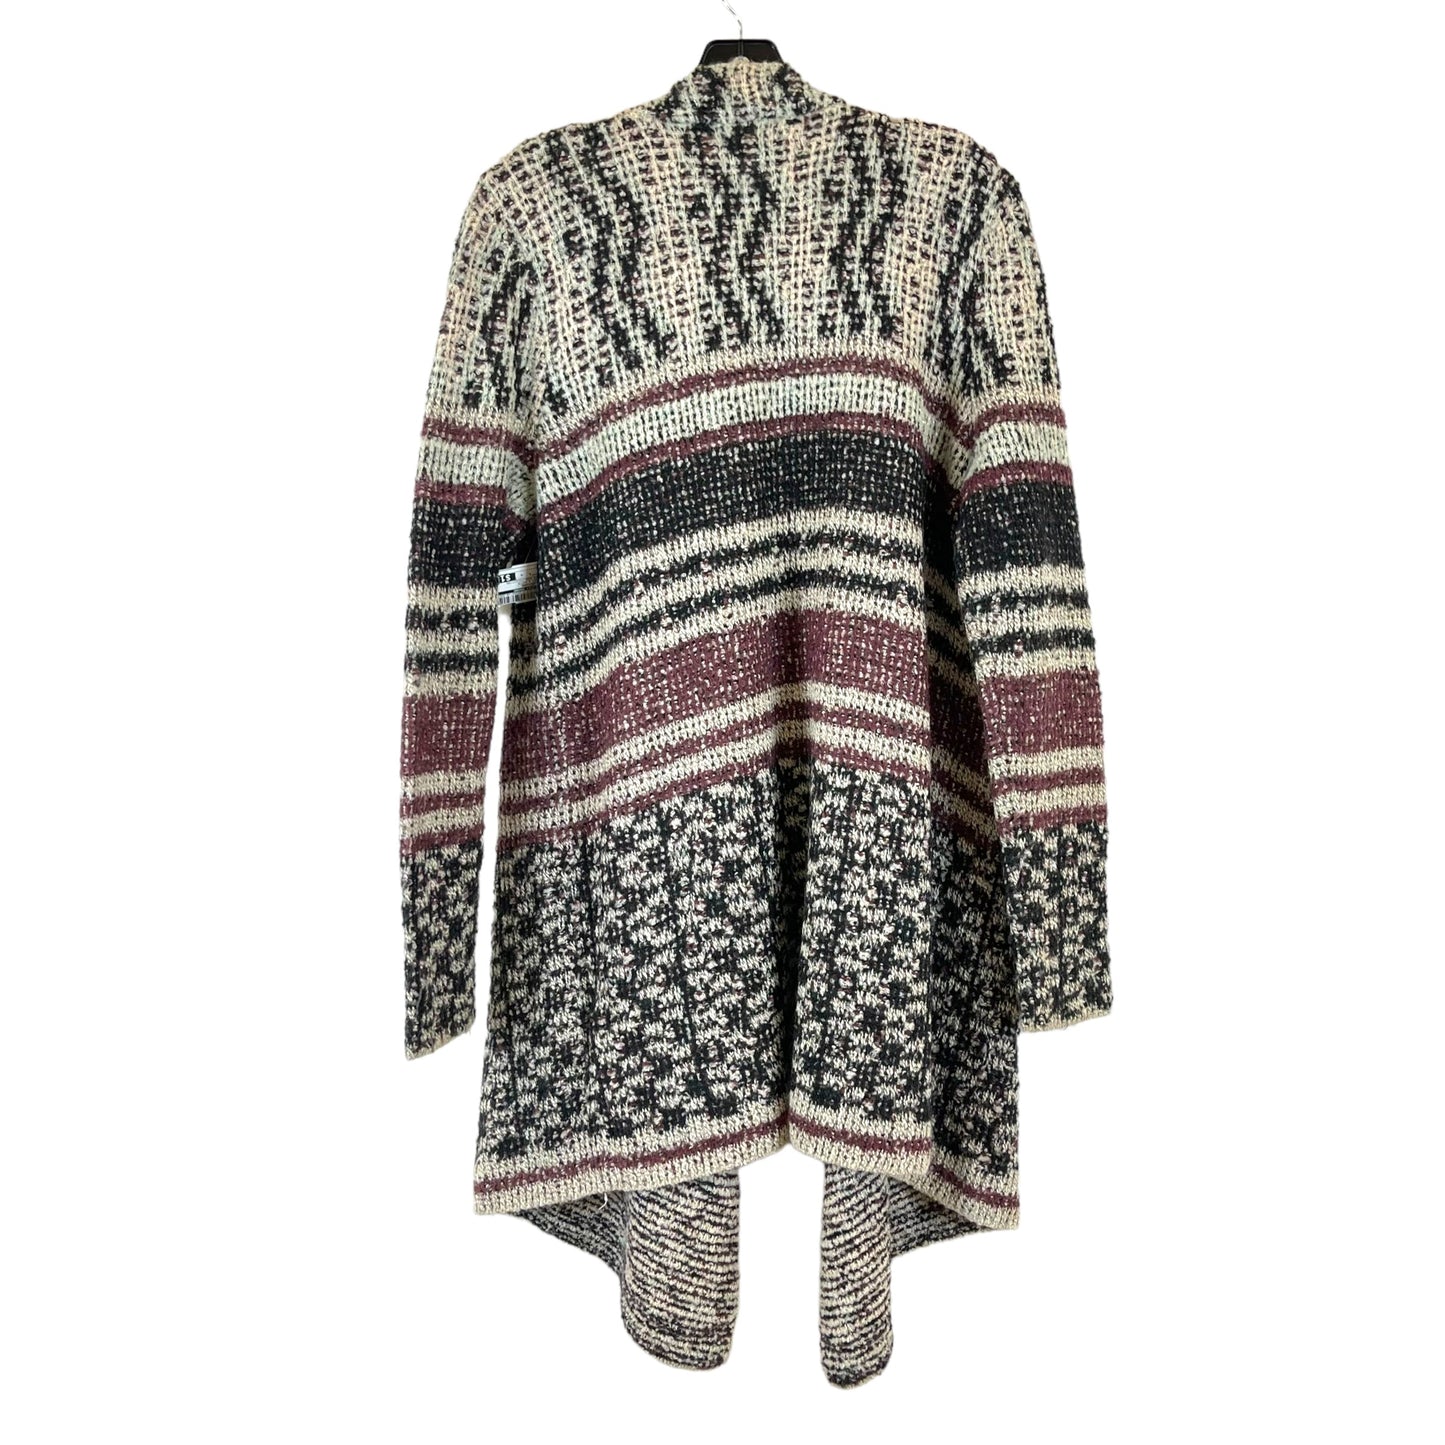 Cardigan By Lucky Brand  Size: L